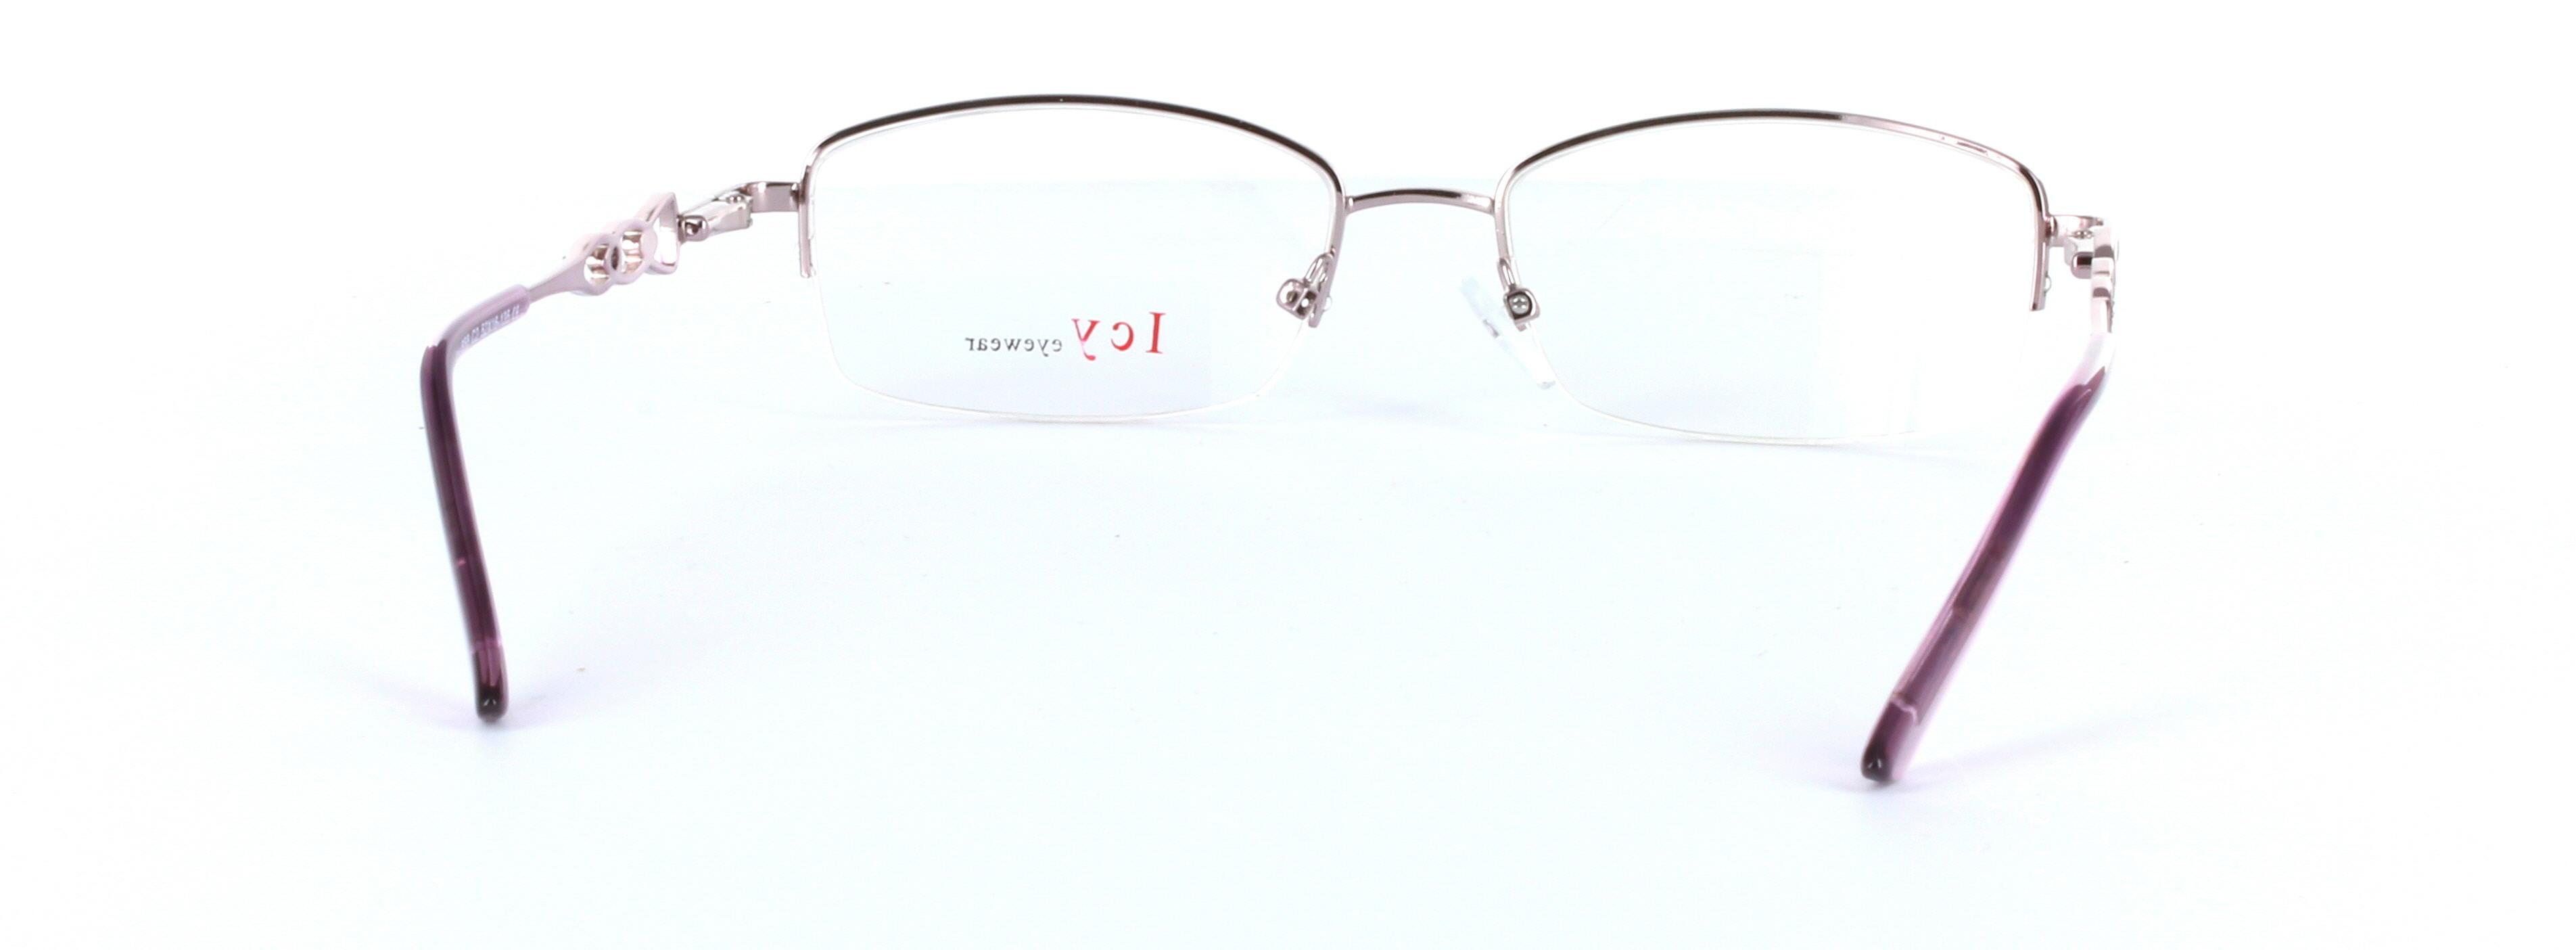 Maisie Lilac Semi Rimless Oval Metal Glasses - Image View 3